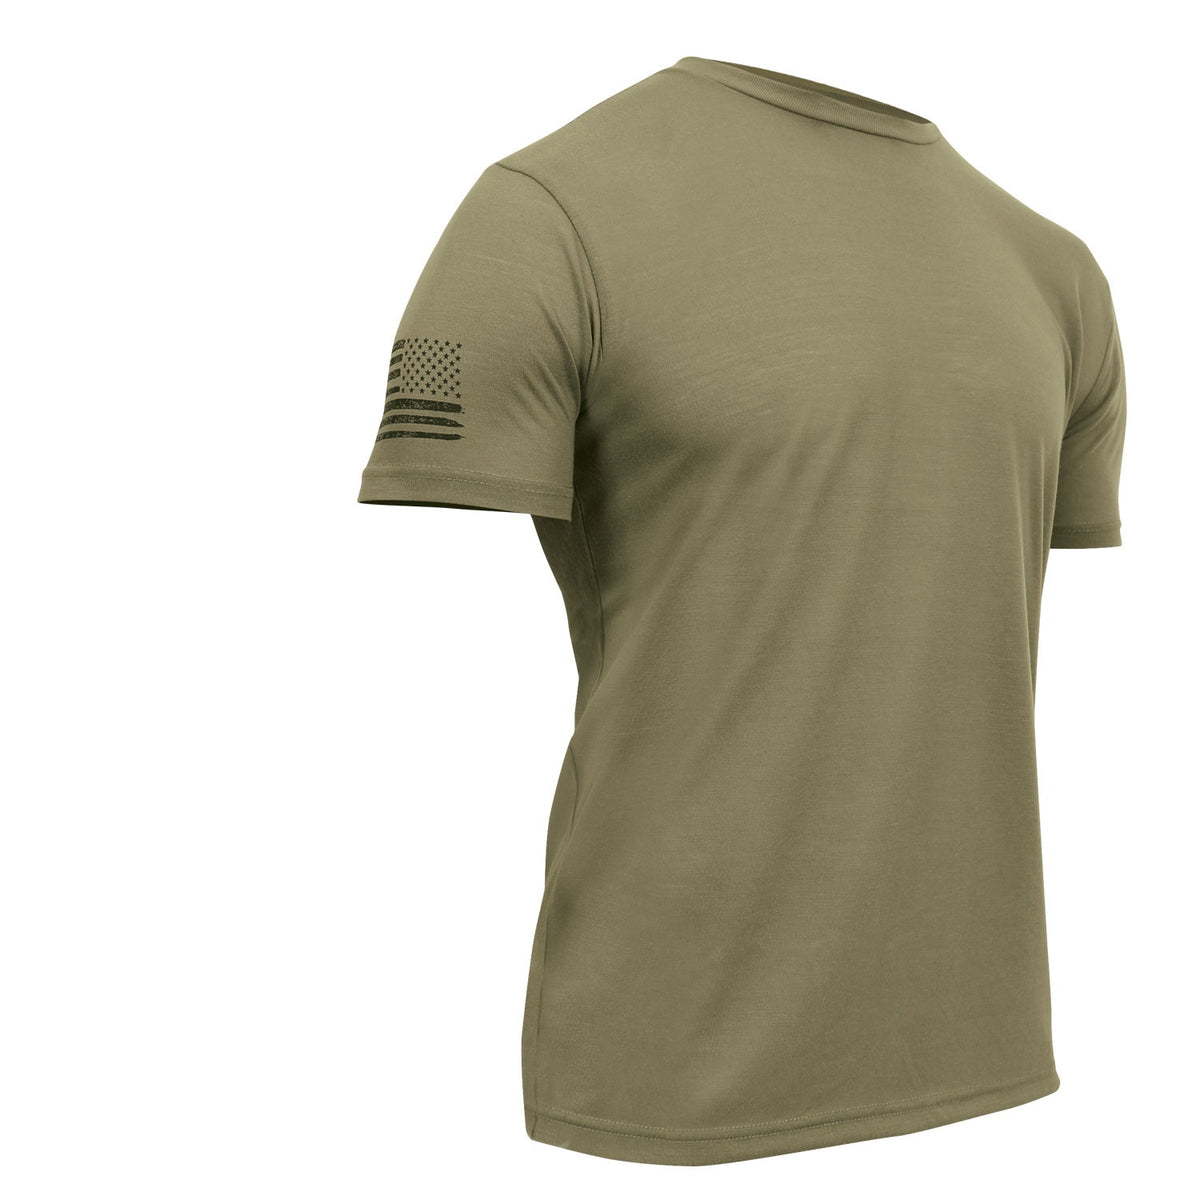 Rothco Tactical Athletic Fit T-Shirt Coyote Brown